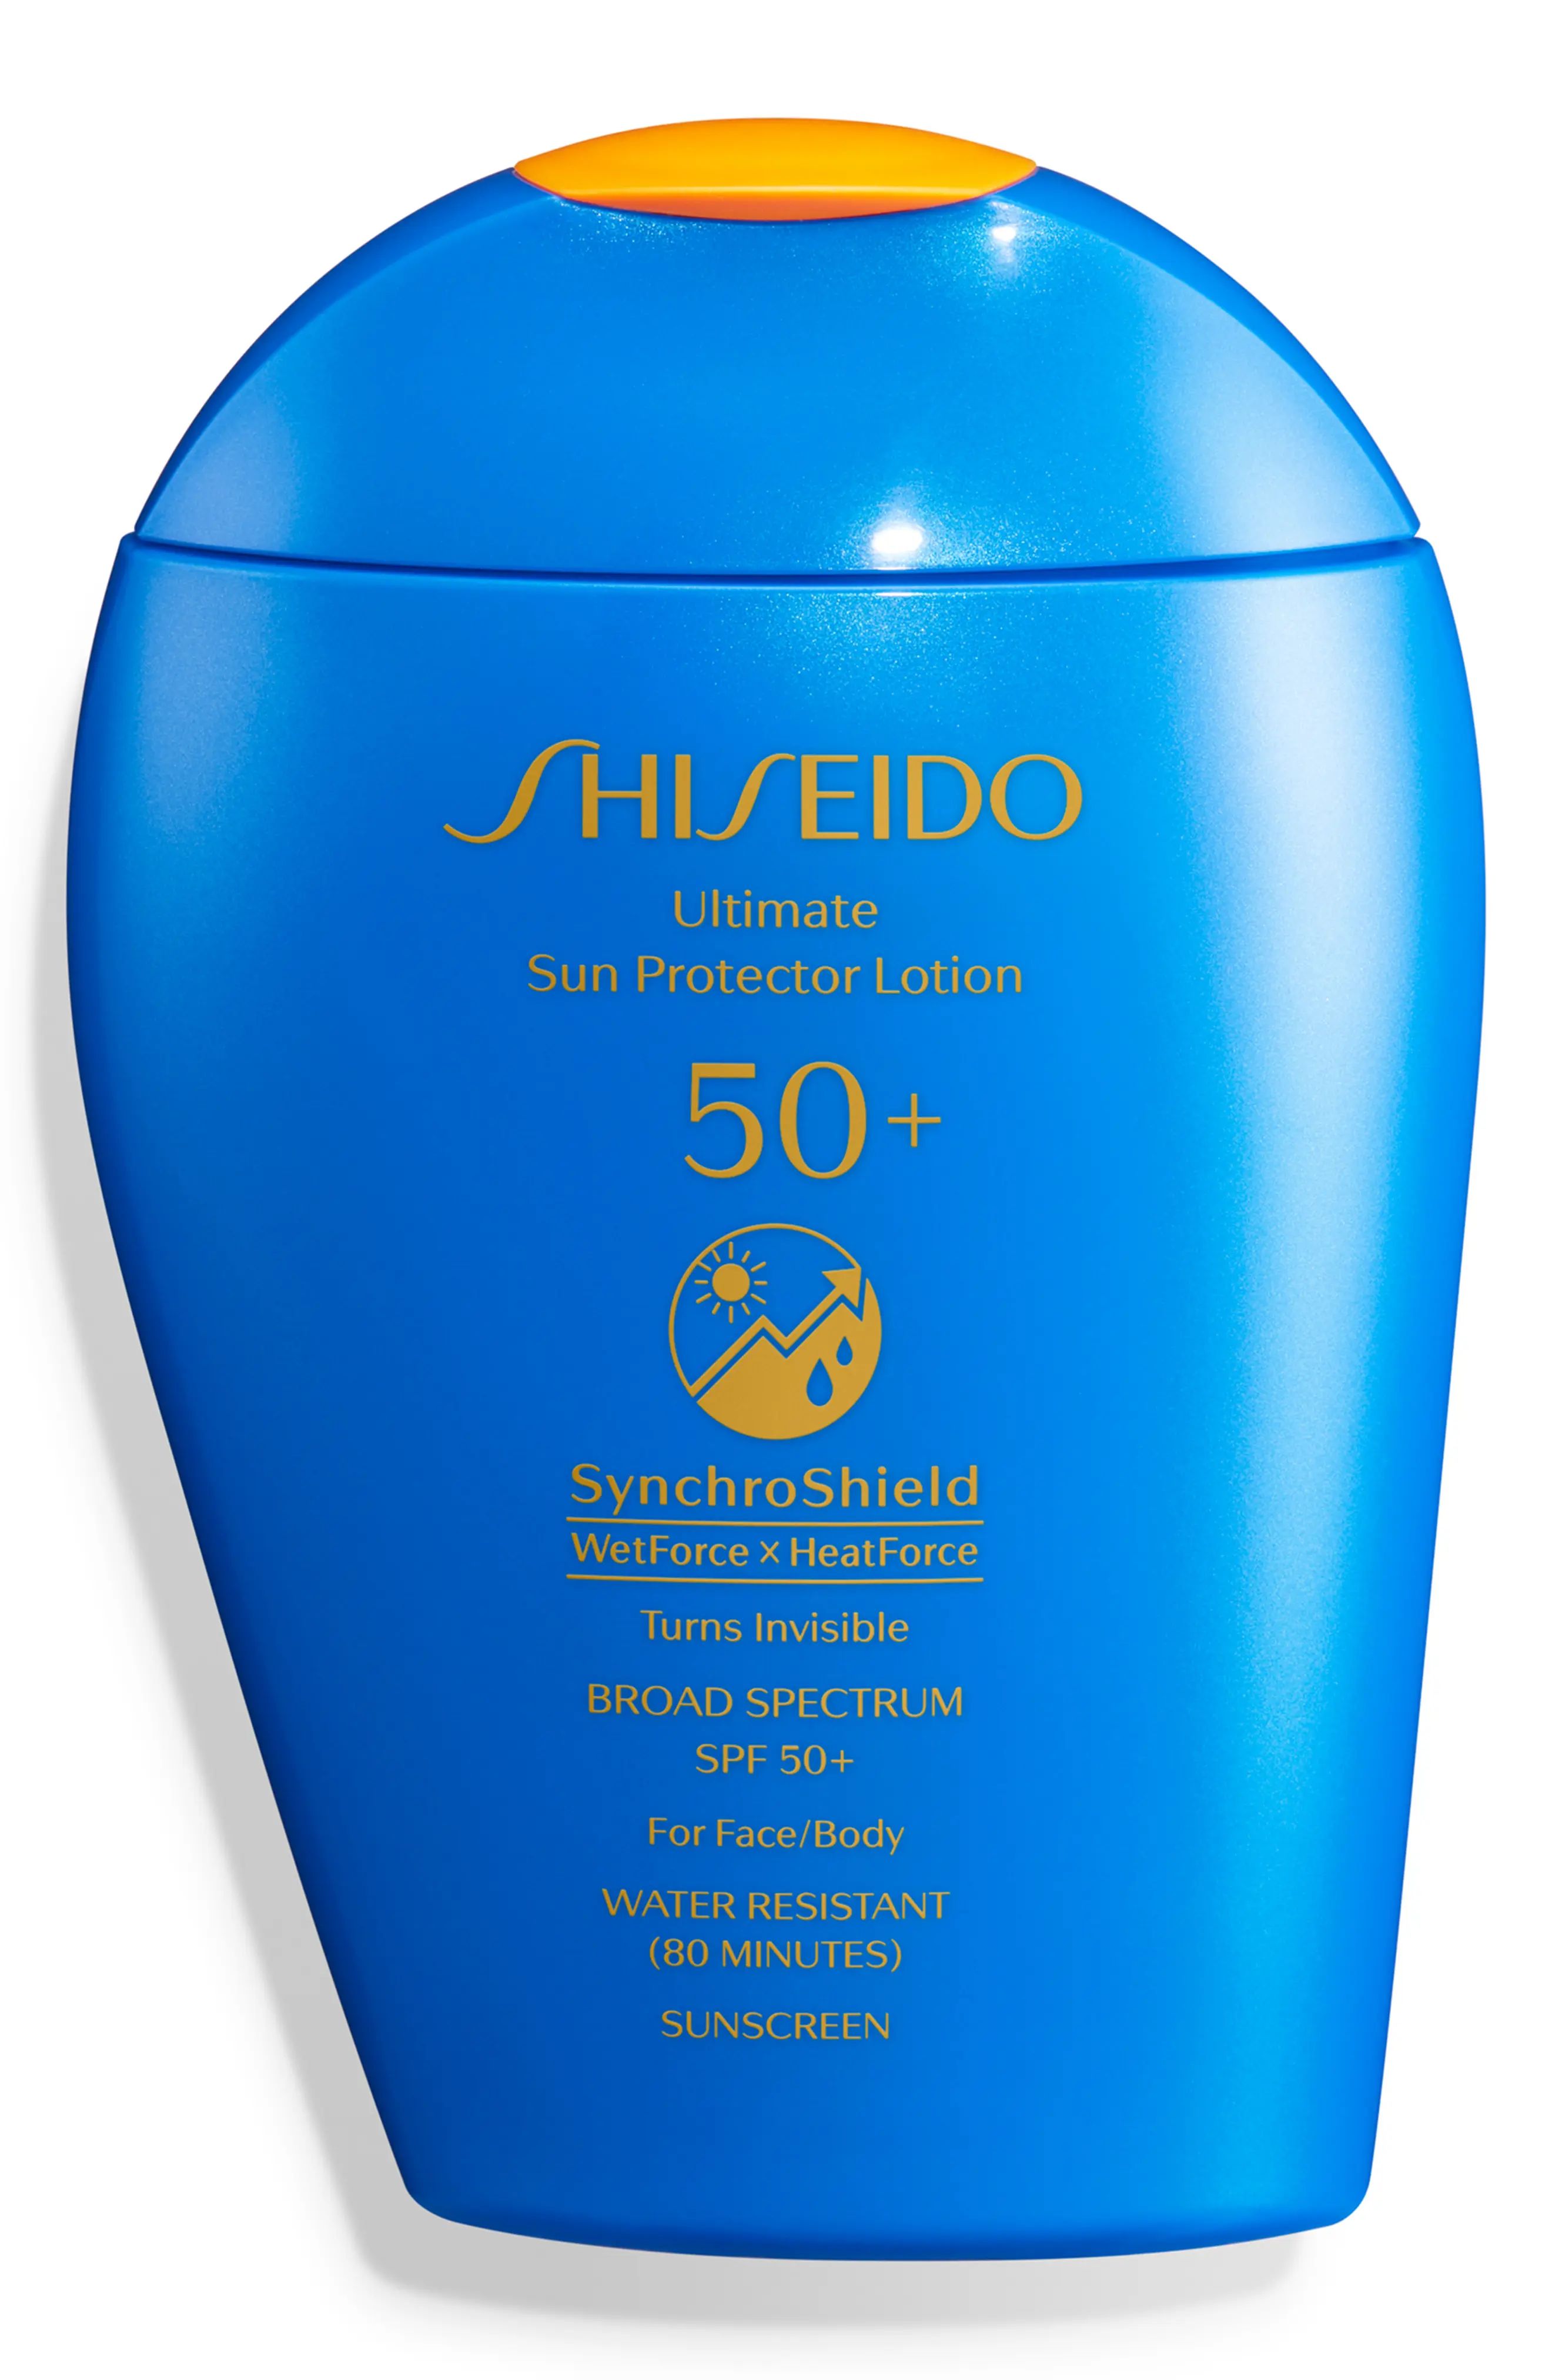 Shiseido Ultimate Sun Protector Lotion SPF 50+ Sunscreen at Nordstrom, Size 1.7 Oz | Nordstrom